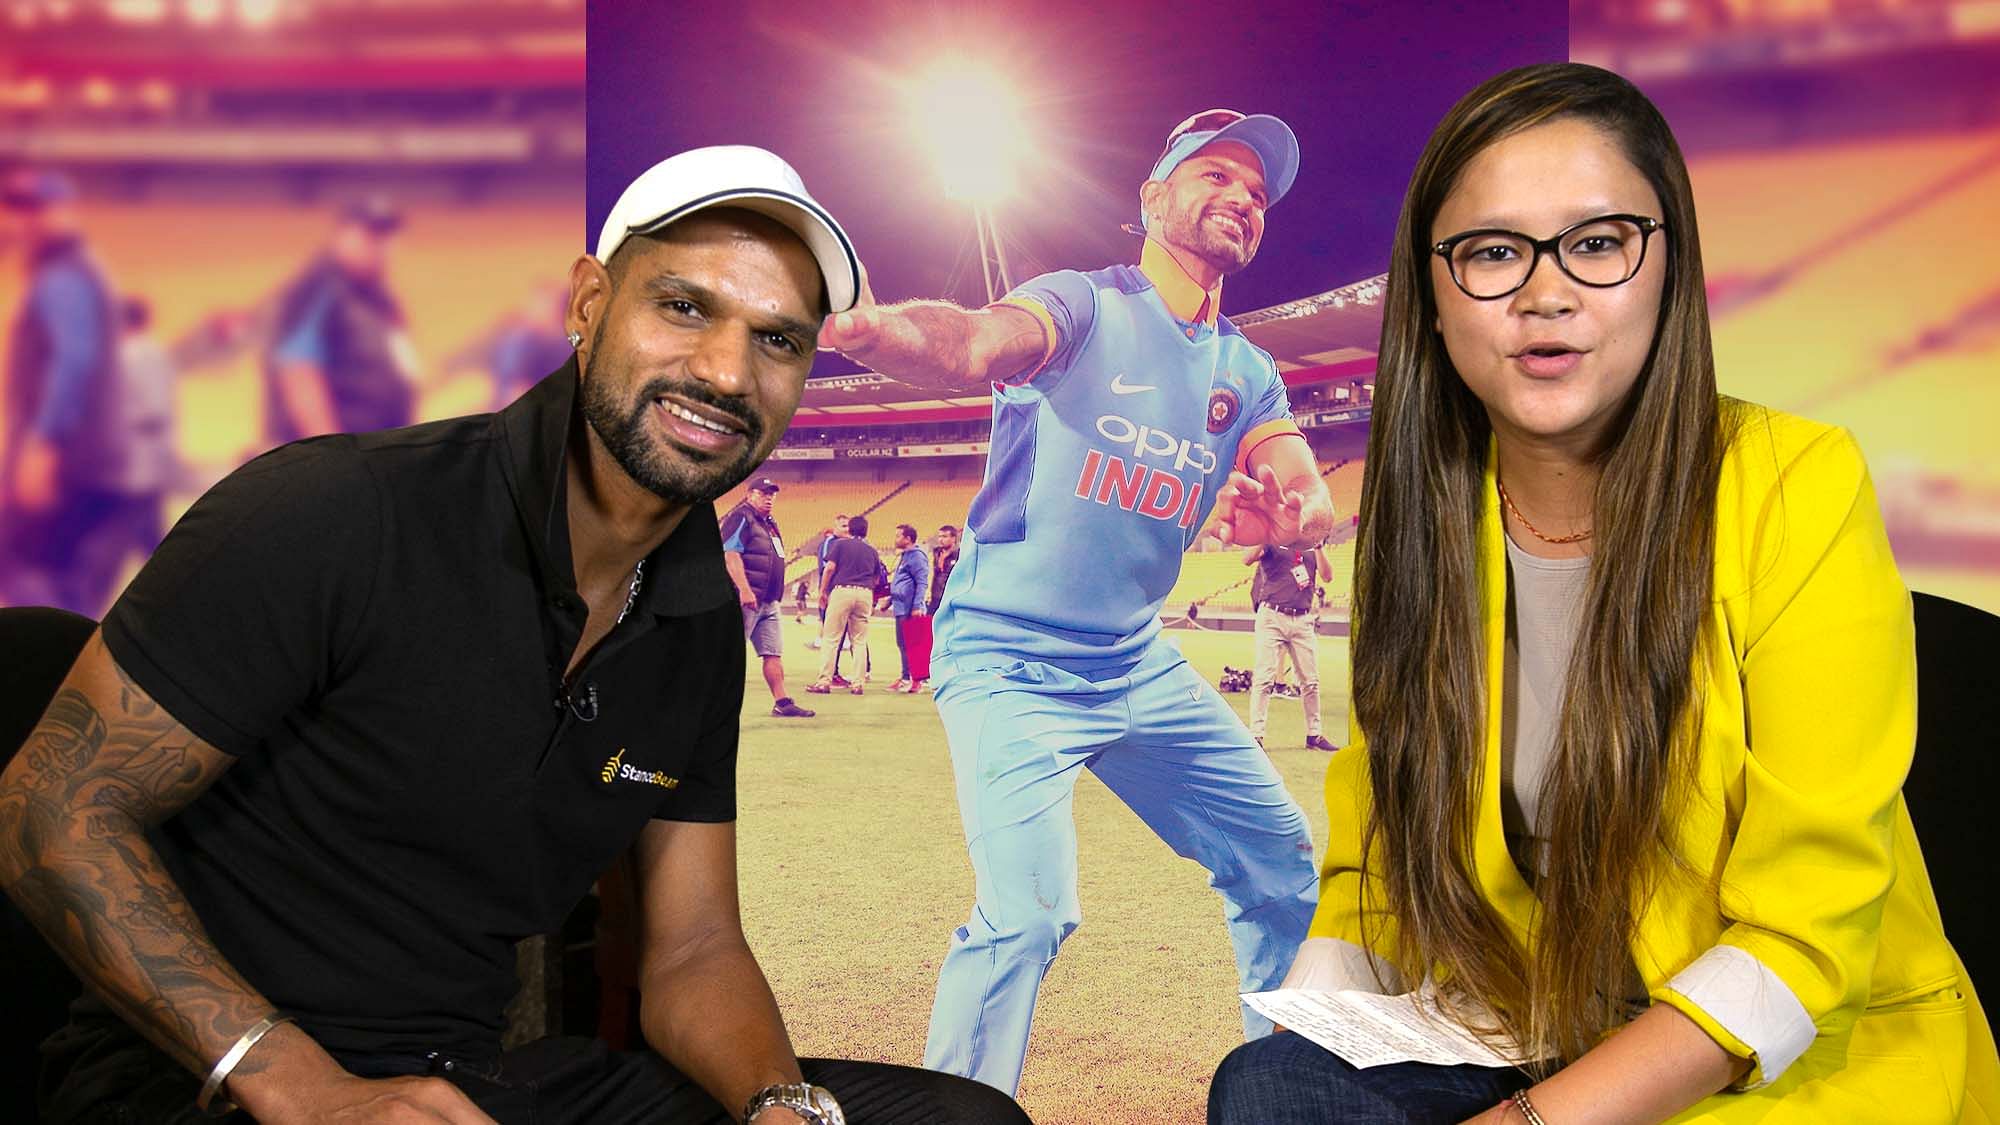 Shikhar Dhawan talks about his life’s mantra and how he stays positive even in adverse times.